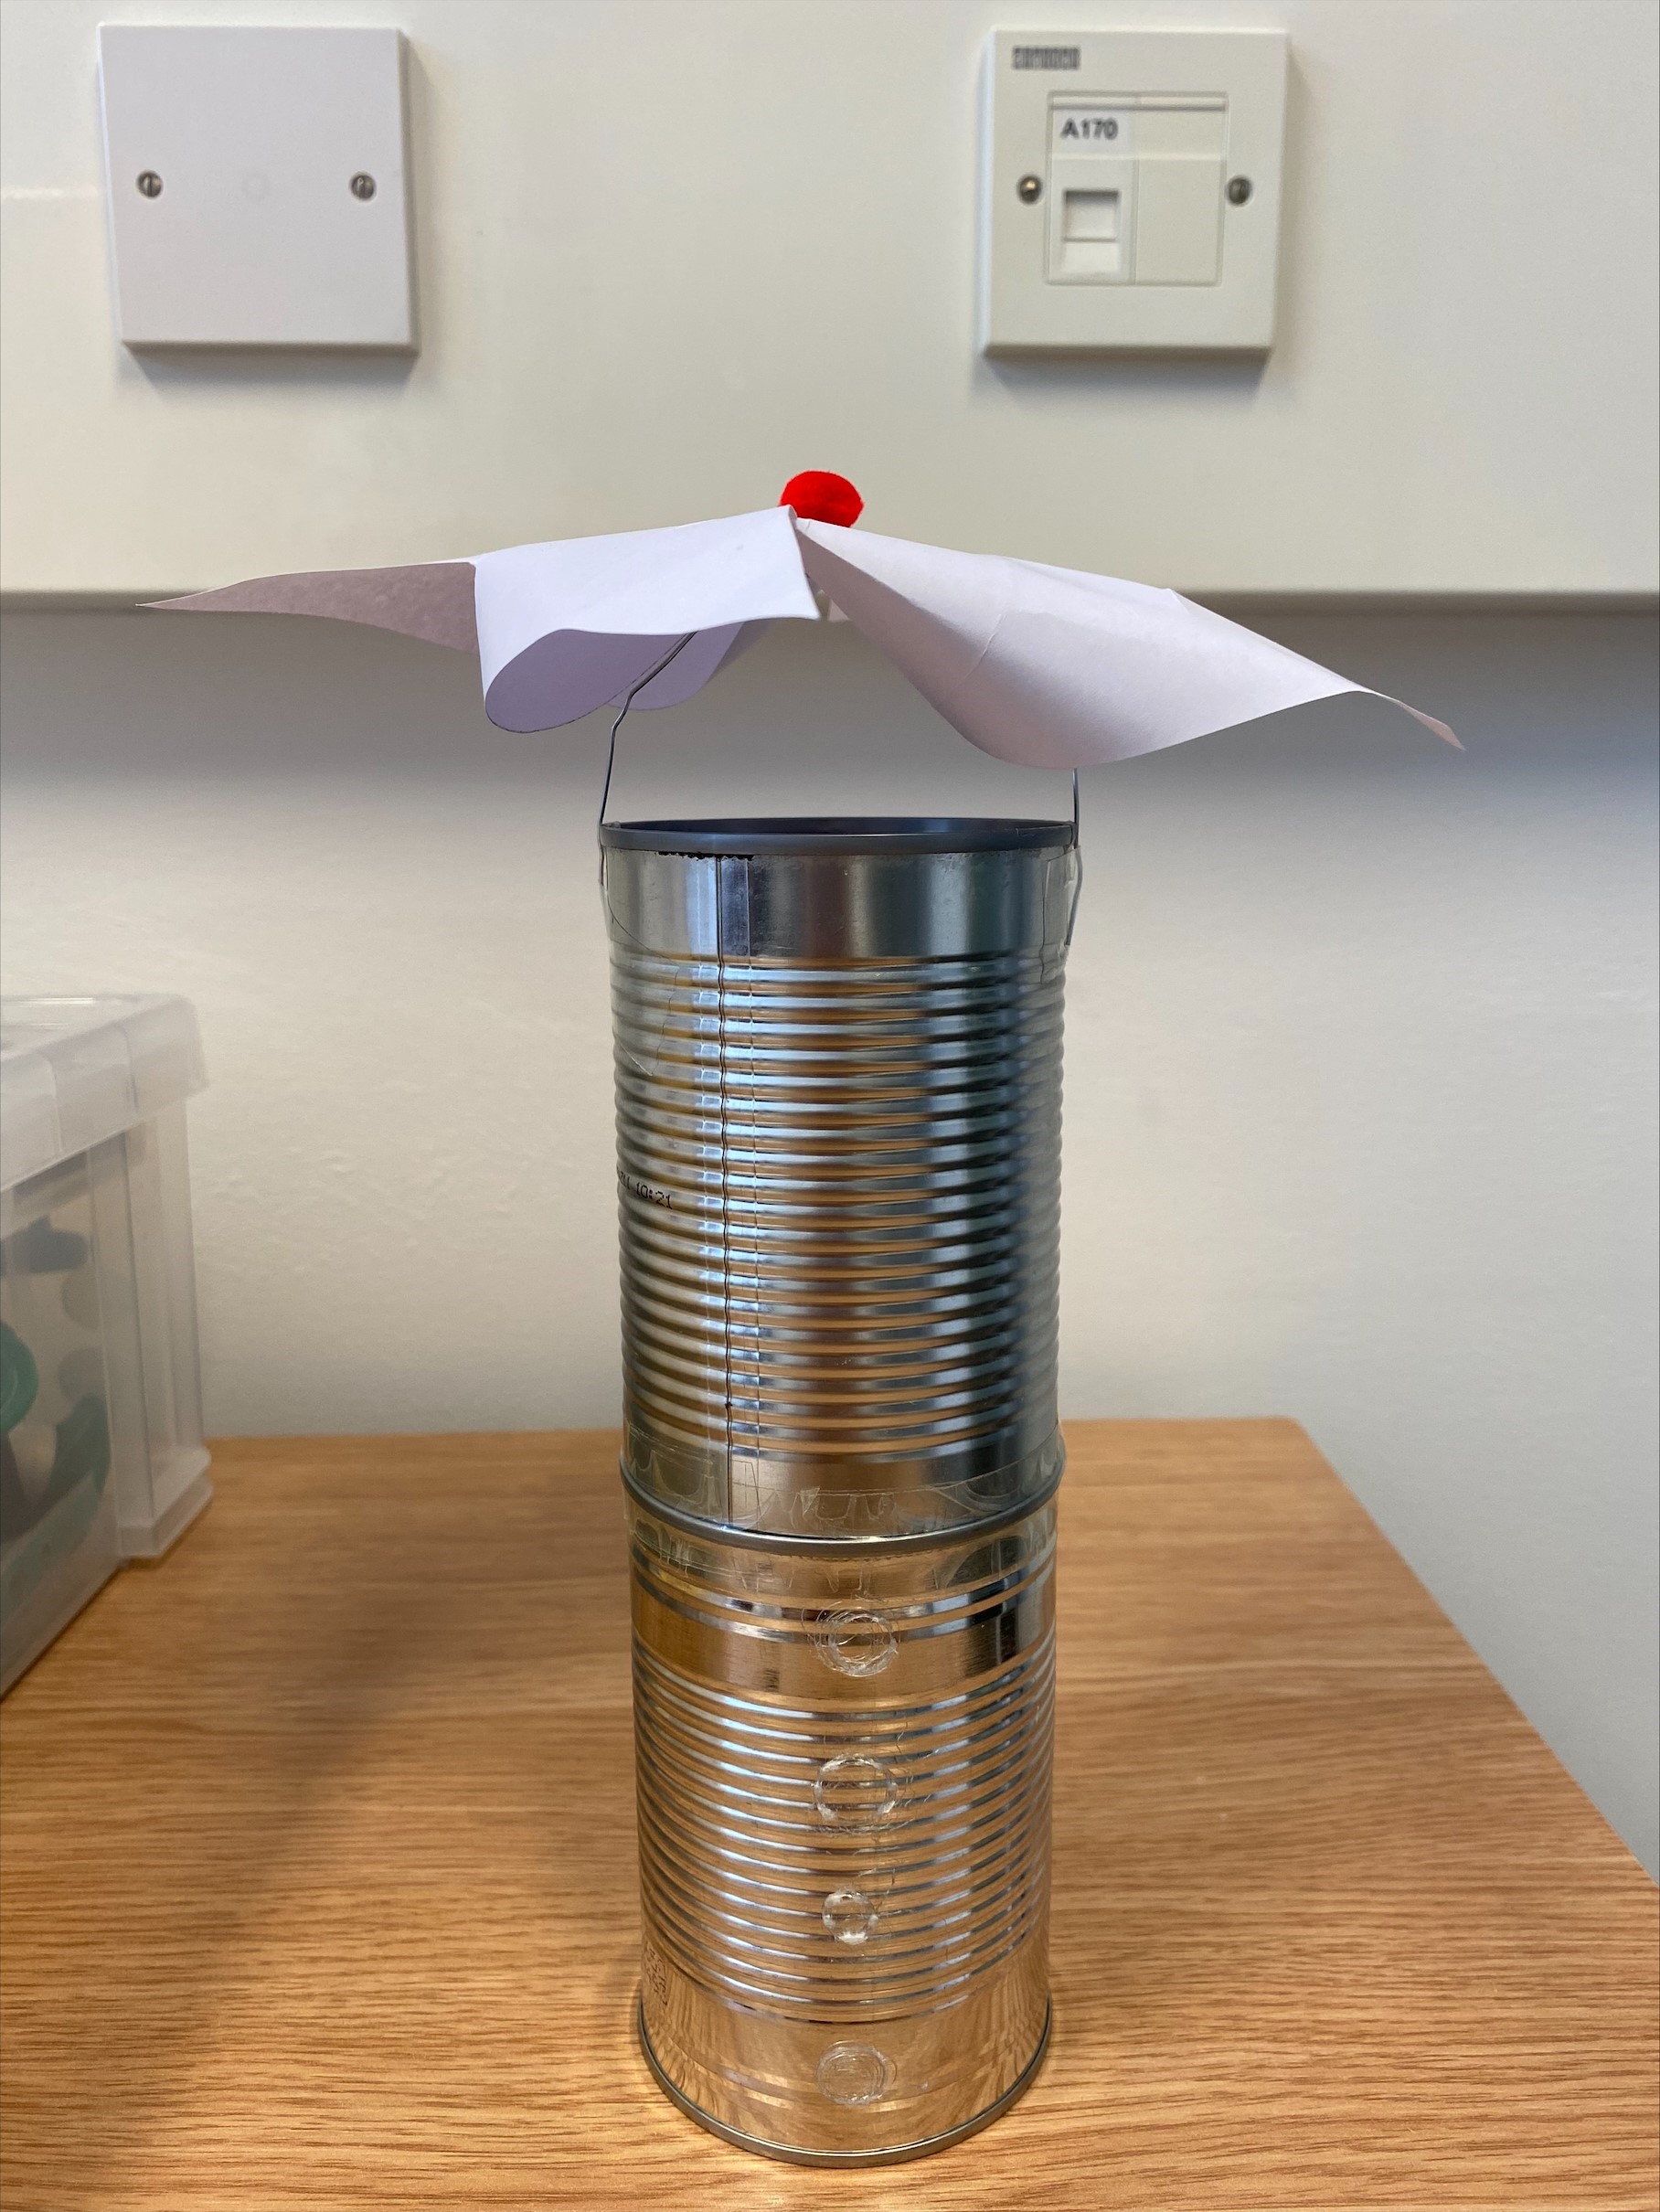 Two tin cans attached one on top of each other. There is a paper clip across the top and a paper windmill on top with a pom pom.